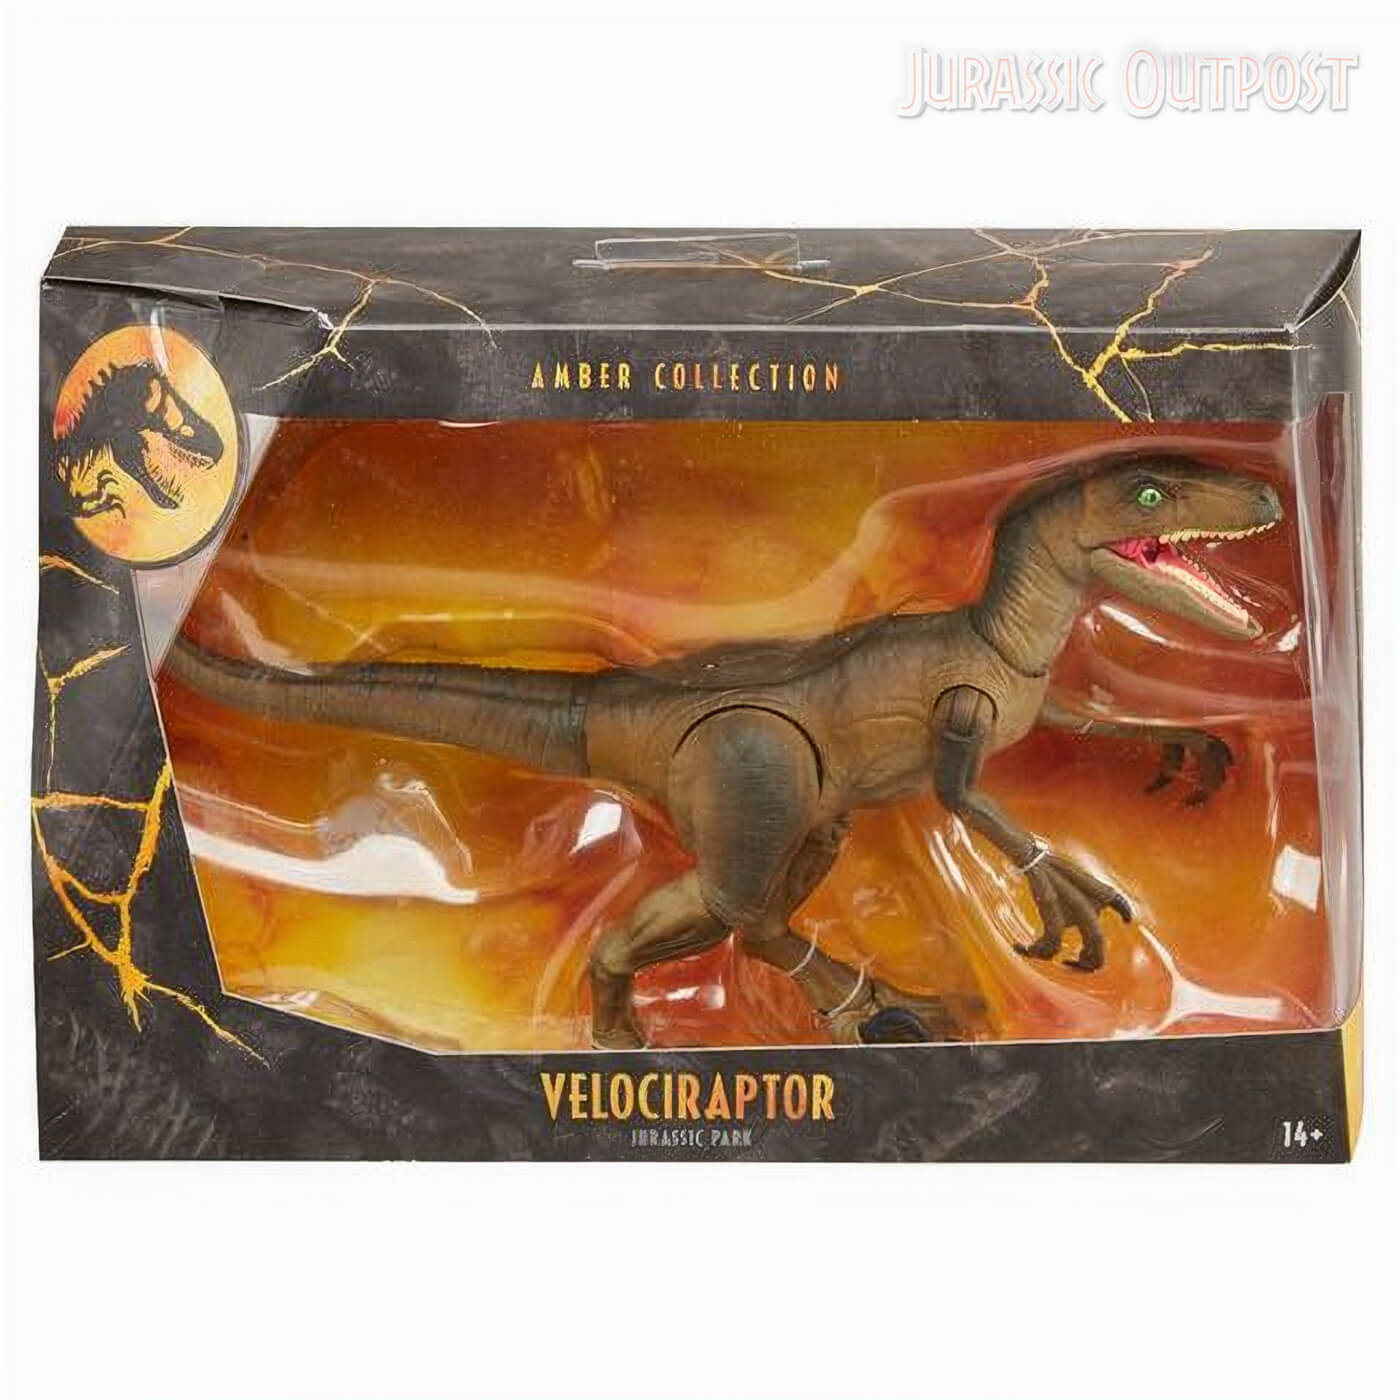 First Look at Mattel’s Jurassic World Amber Collection Packaging and ...